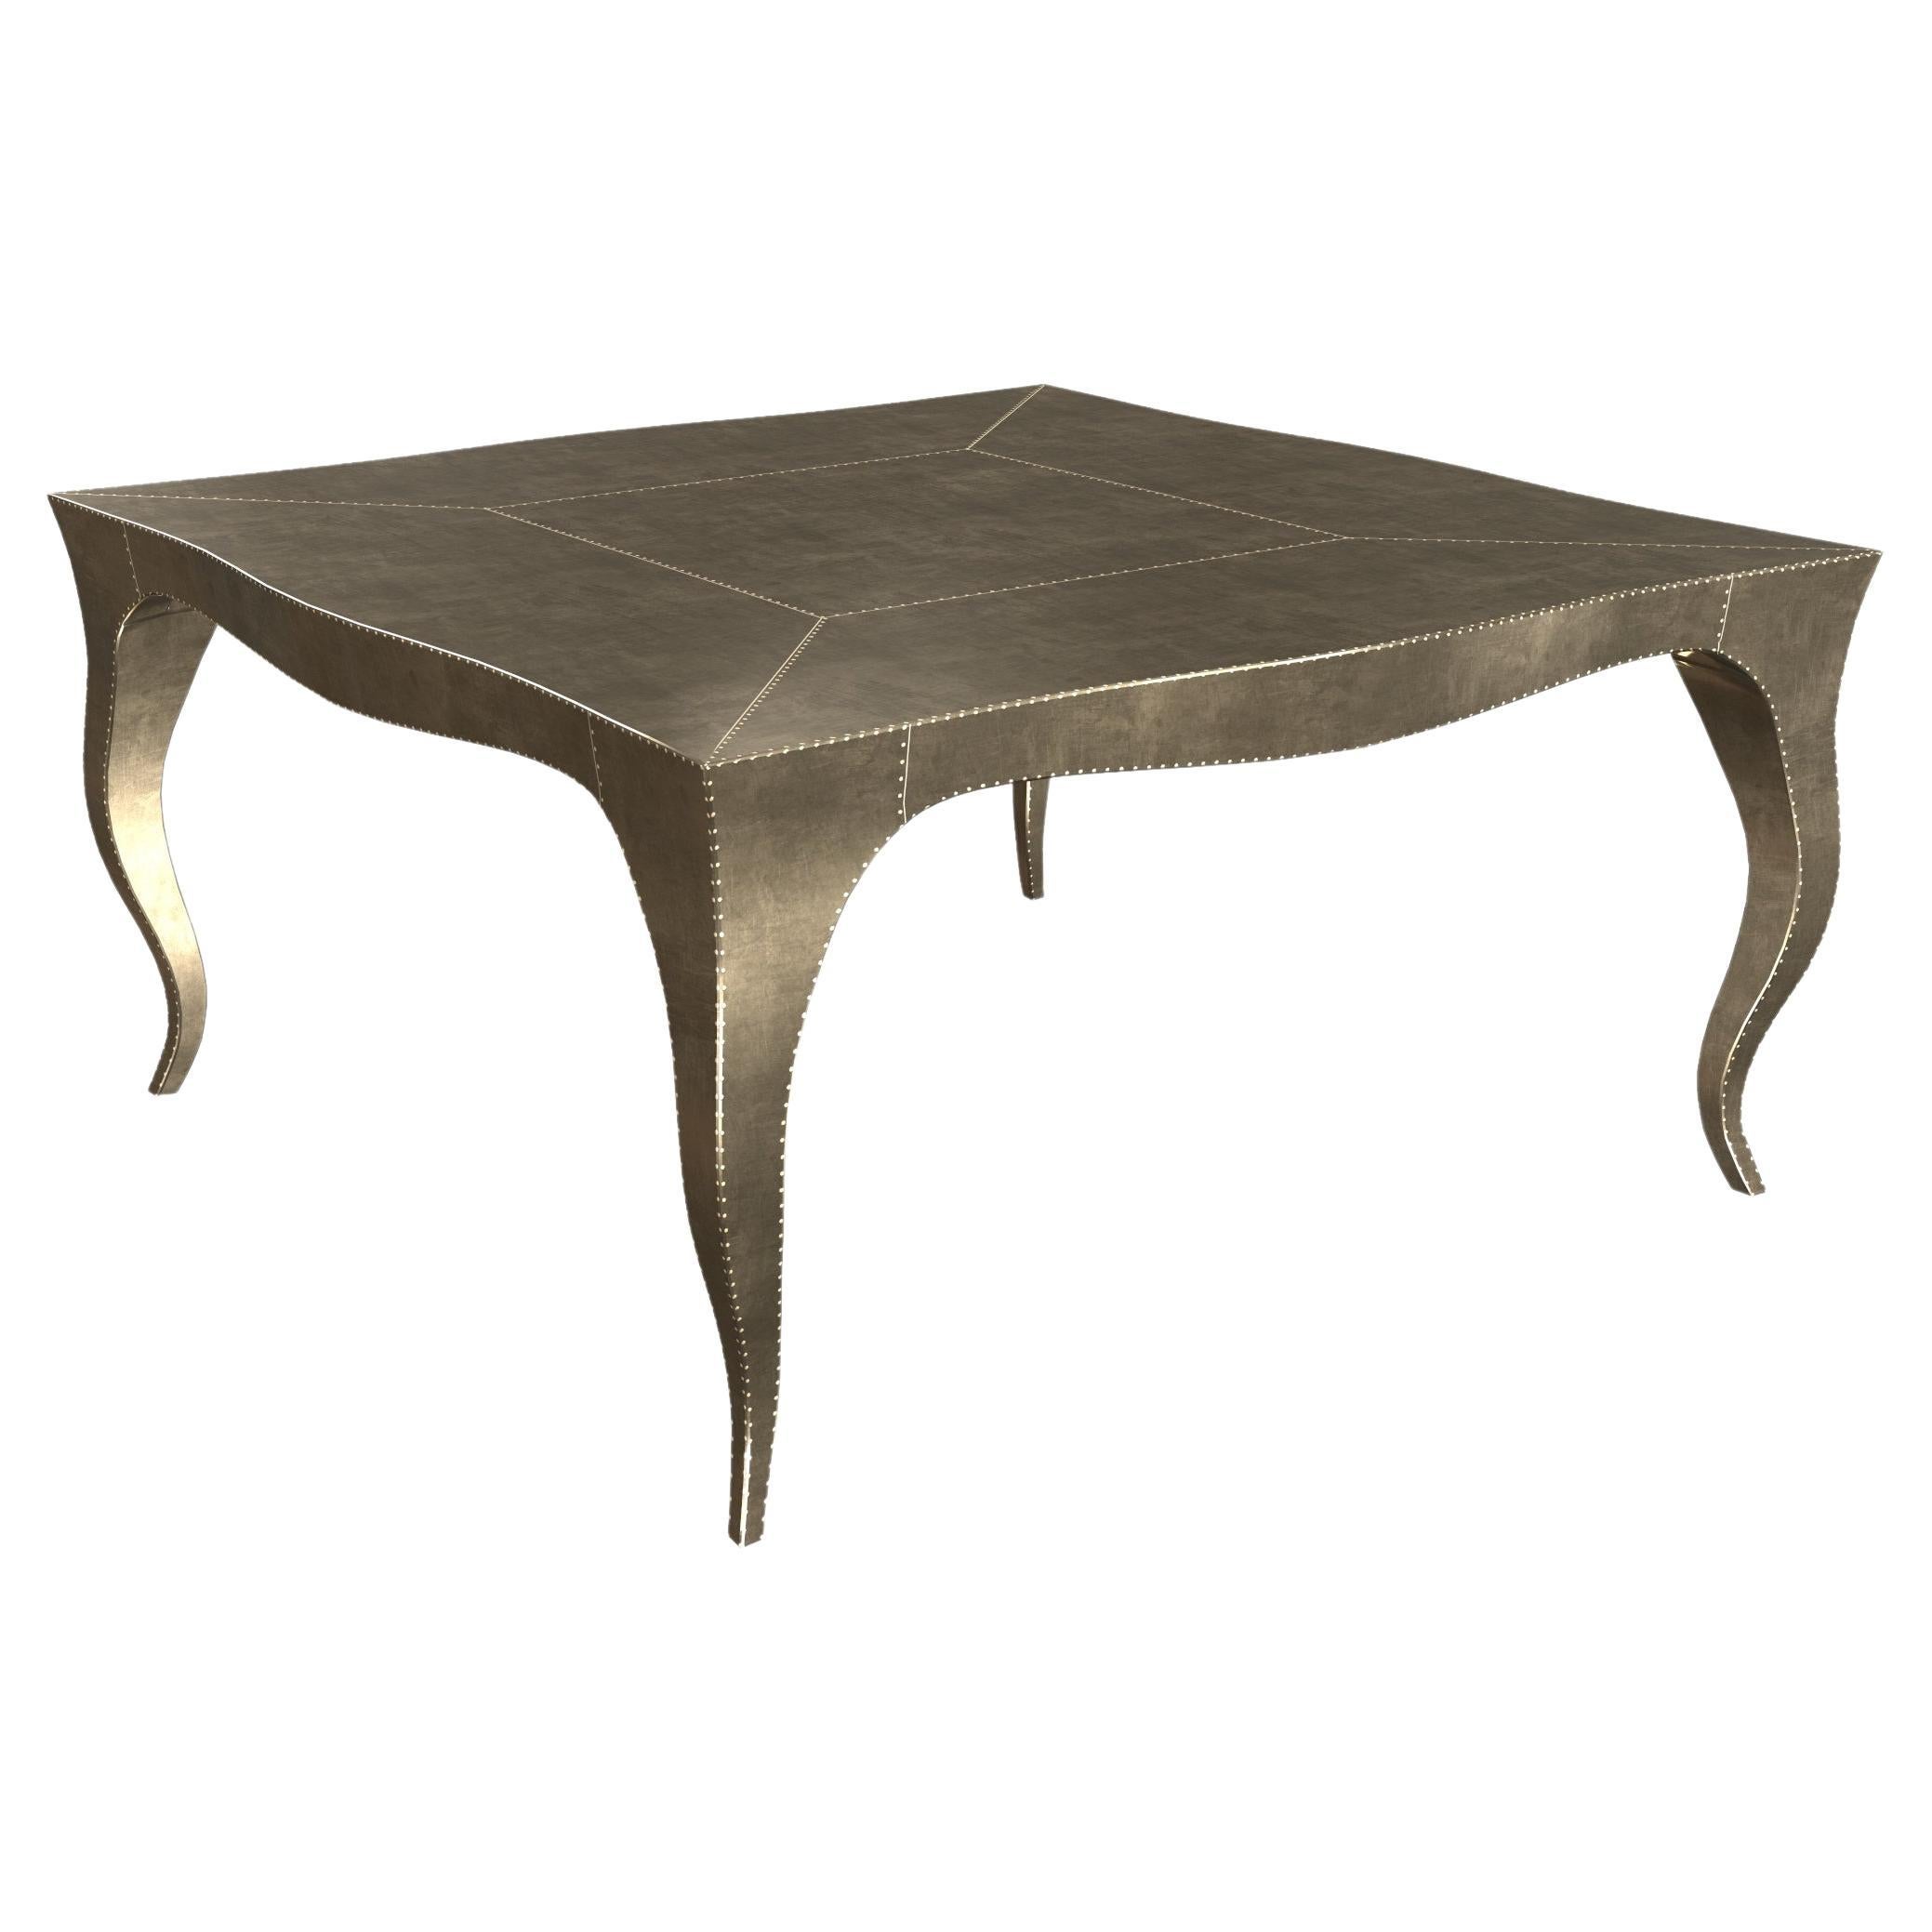 Louise Art Deco Nesting Tables Smooth Brass 18.5x18.5x10 inch by Paul M.